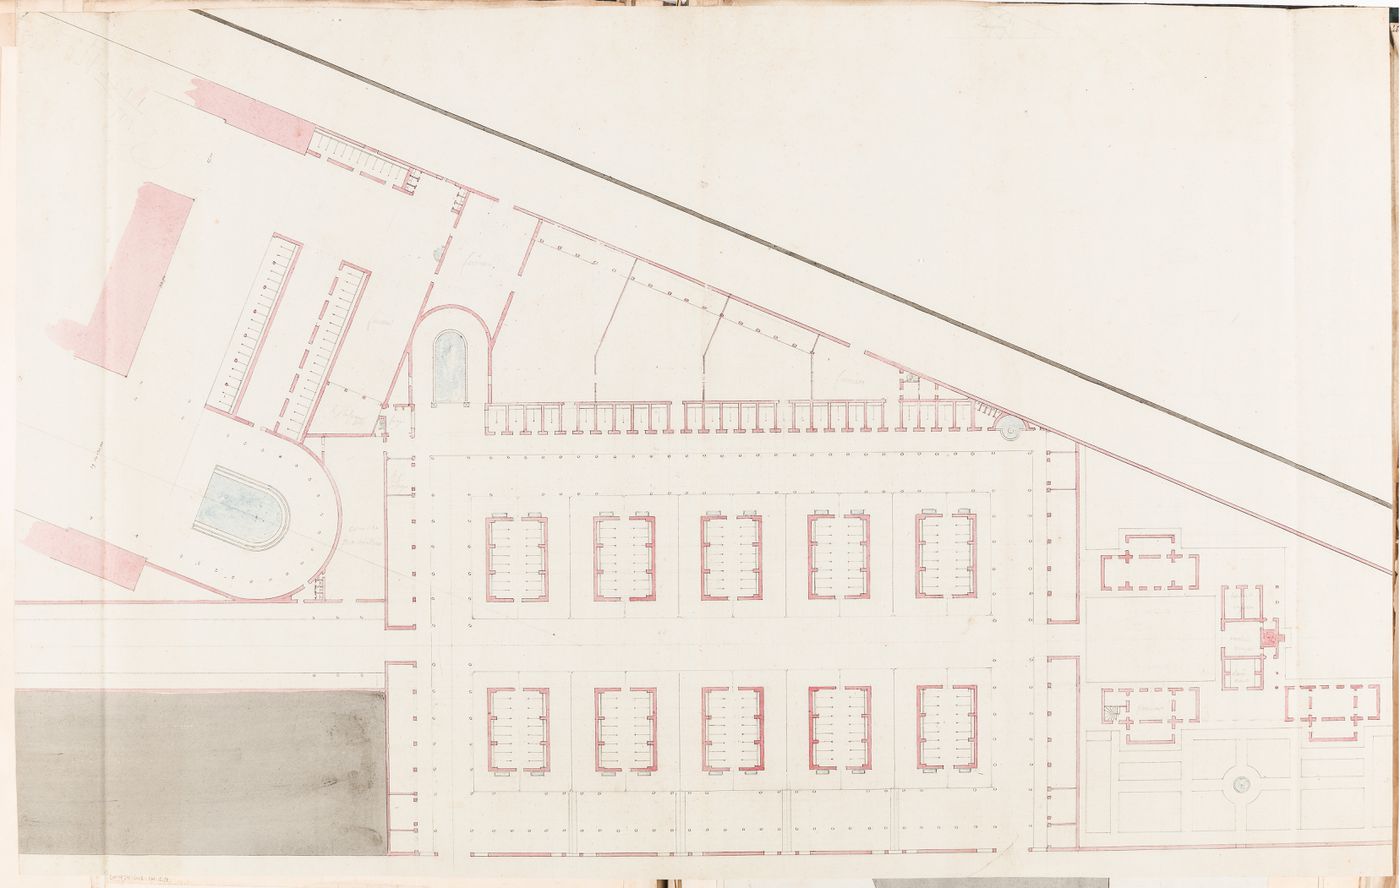 Project for a horse auction house and infirmary, Clos St. Charles, nouveau quartier Poissonnière: Ground floor plan for the infirmary